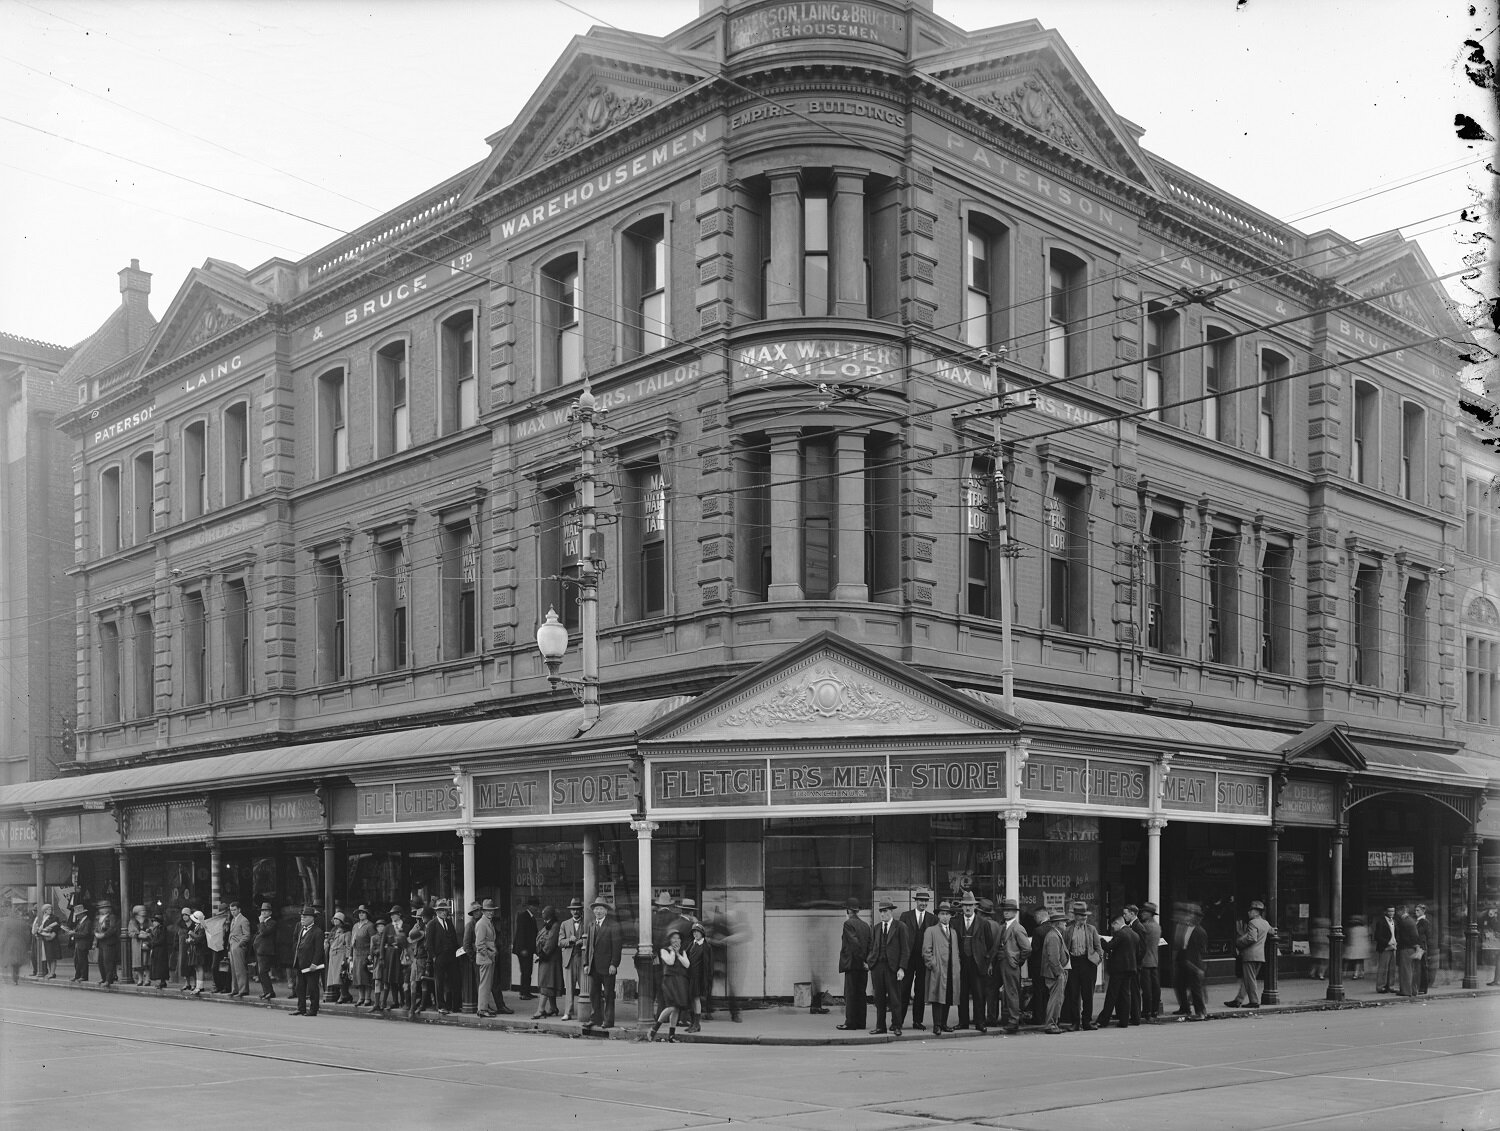  EMPIRE BUILDING CIRCA 1932?  Image courtesy of the State Library of Western Australia: 101521PD 